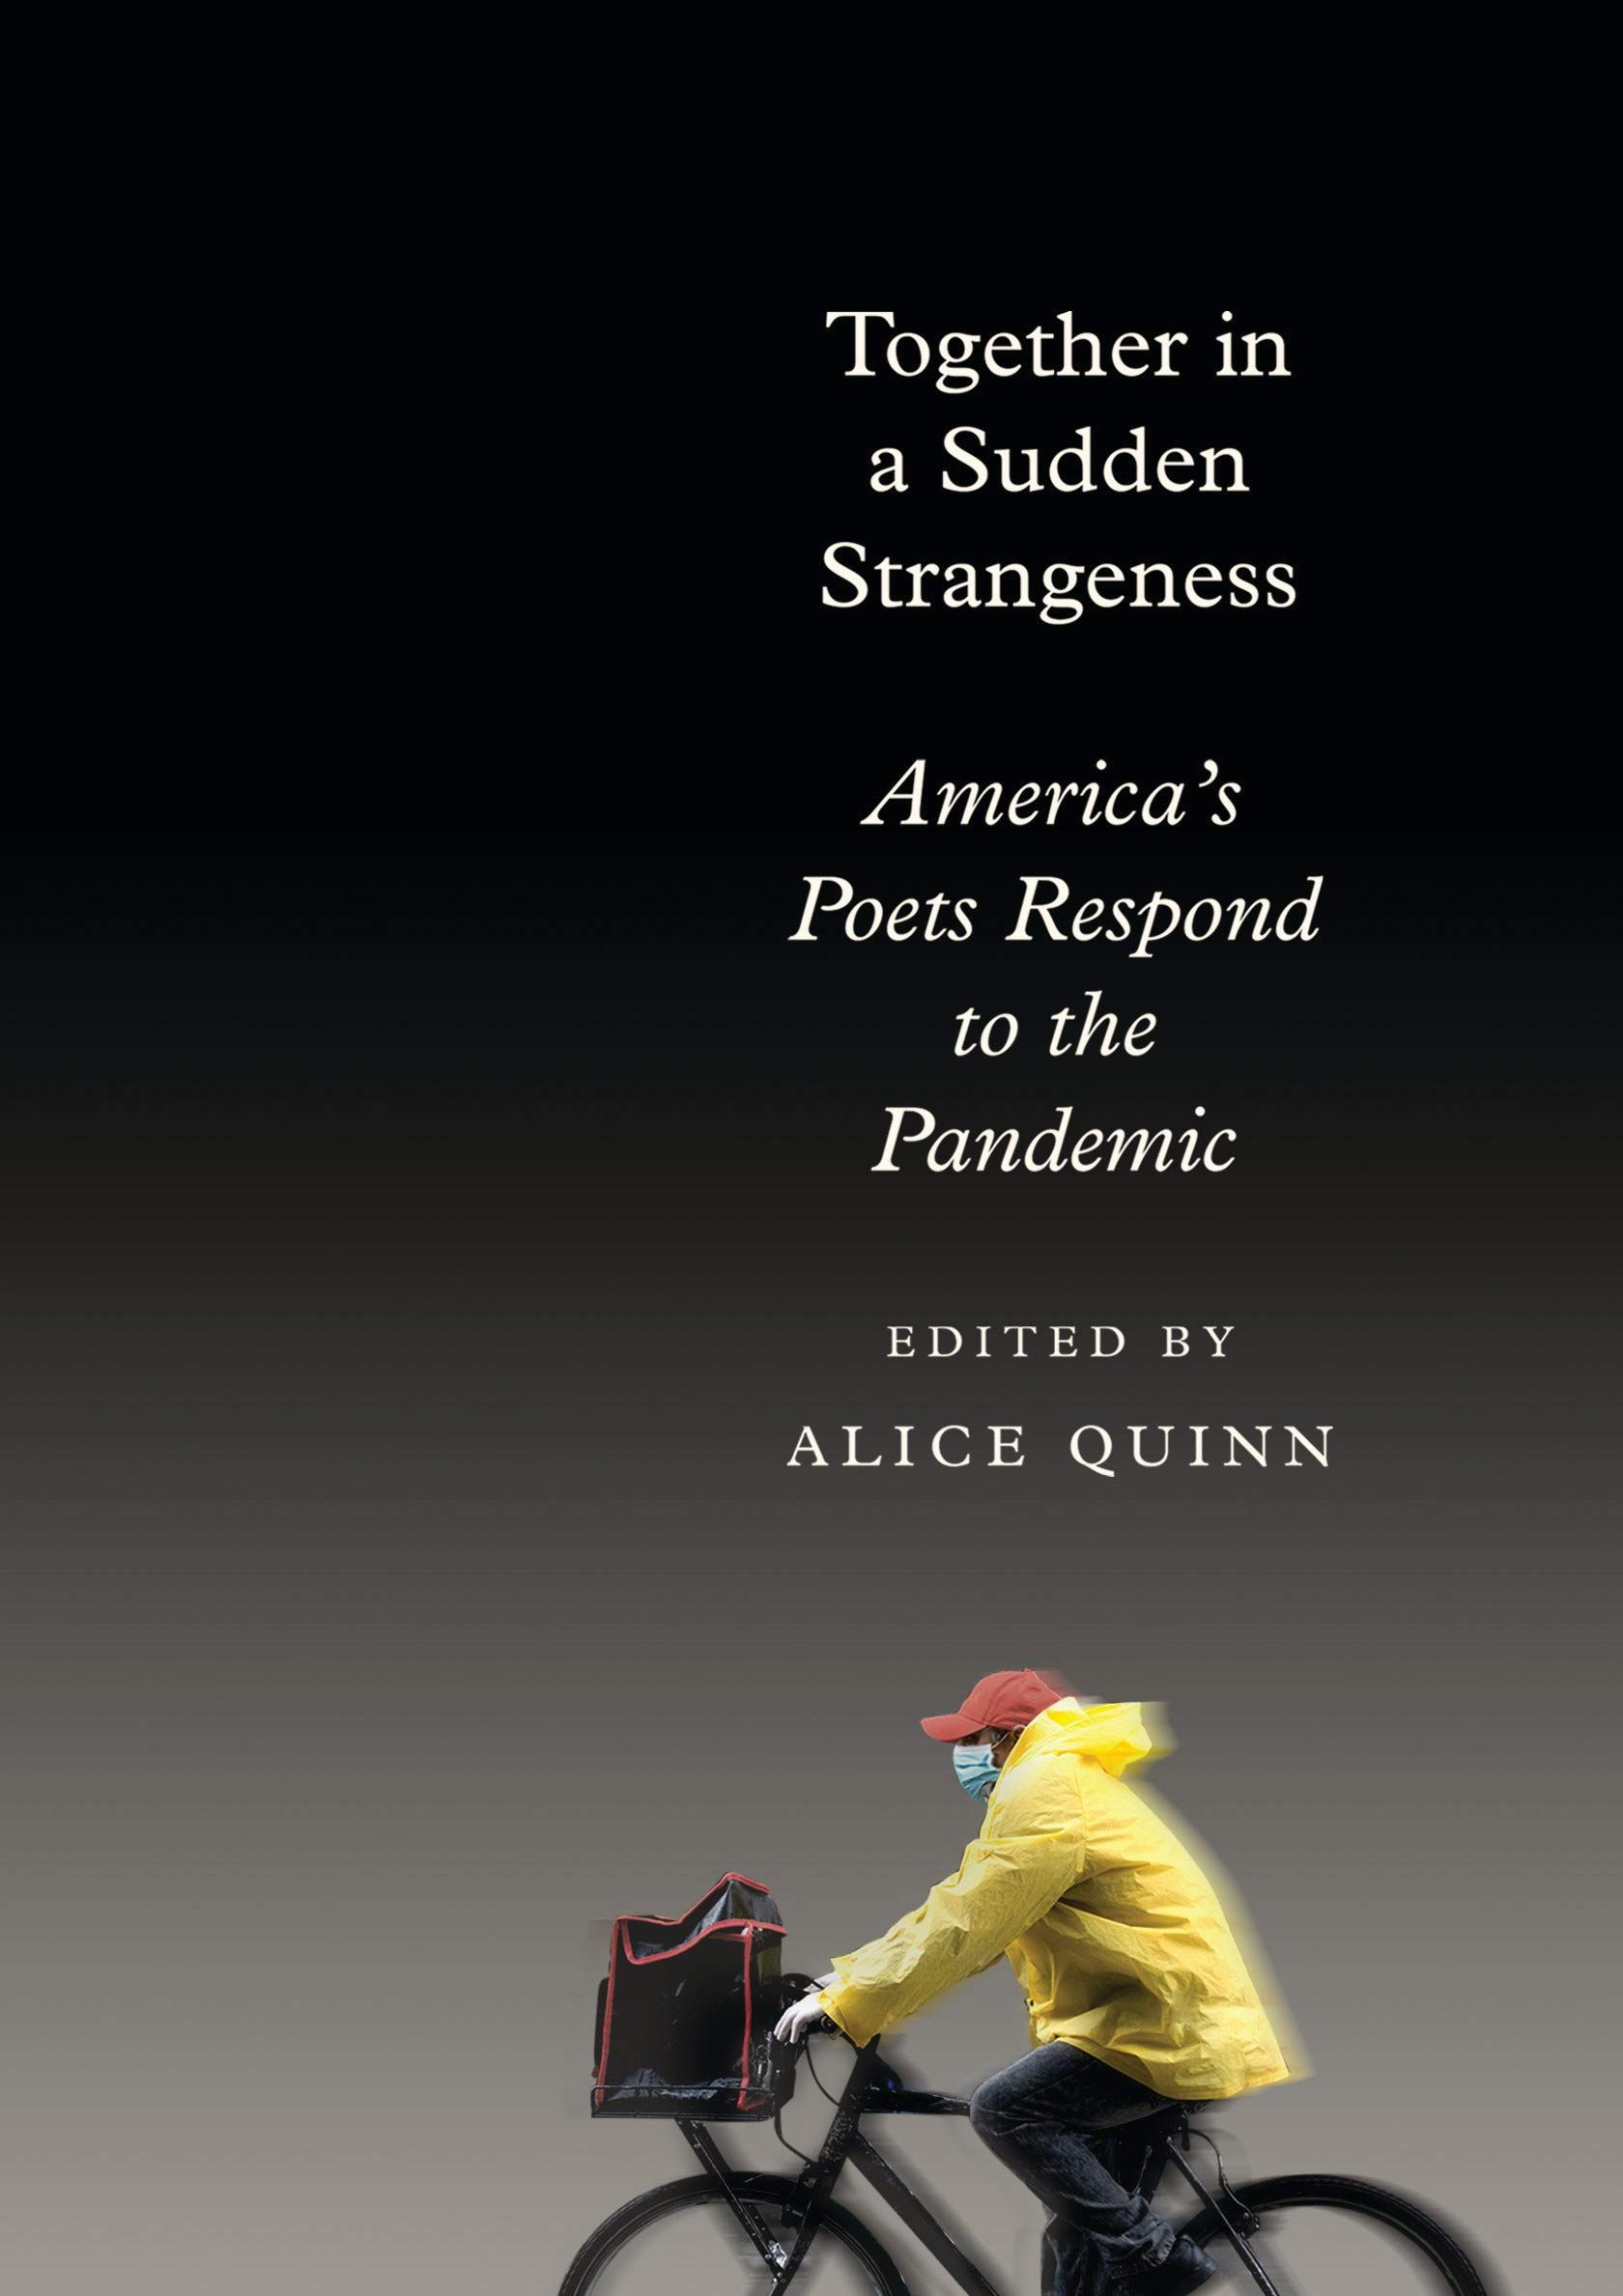 Together in a Sudden Strangeness by Alice Quinn